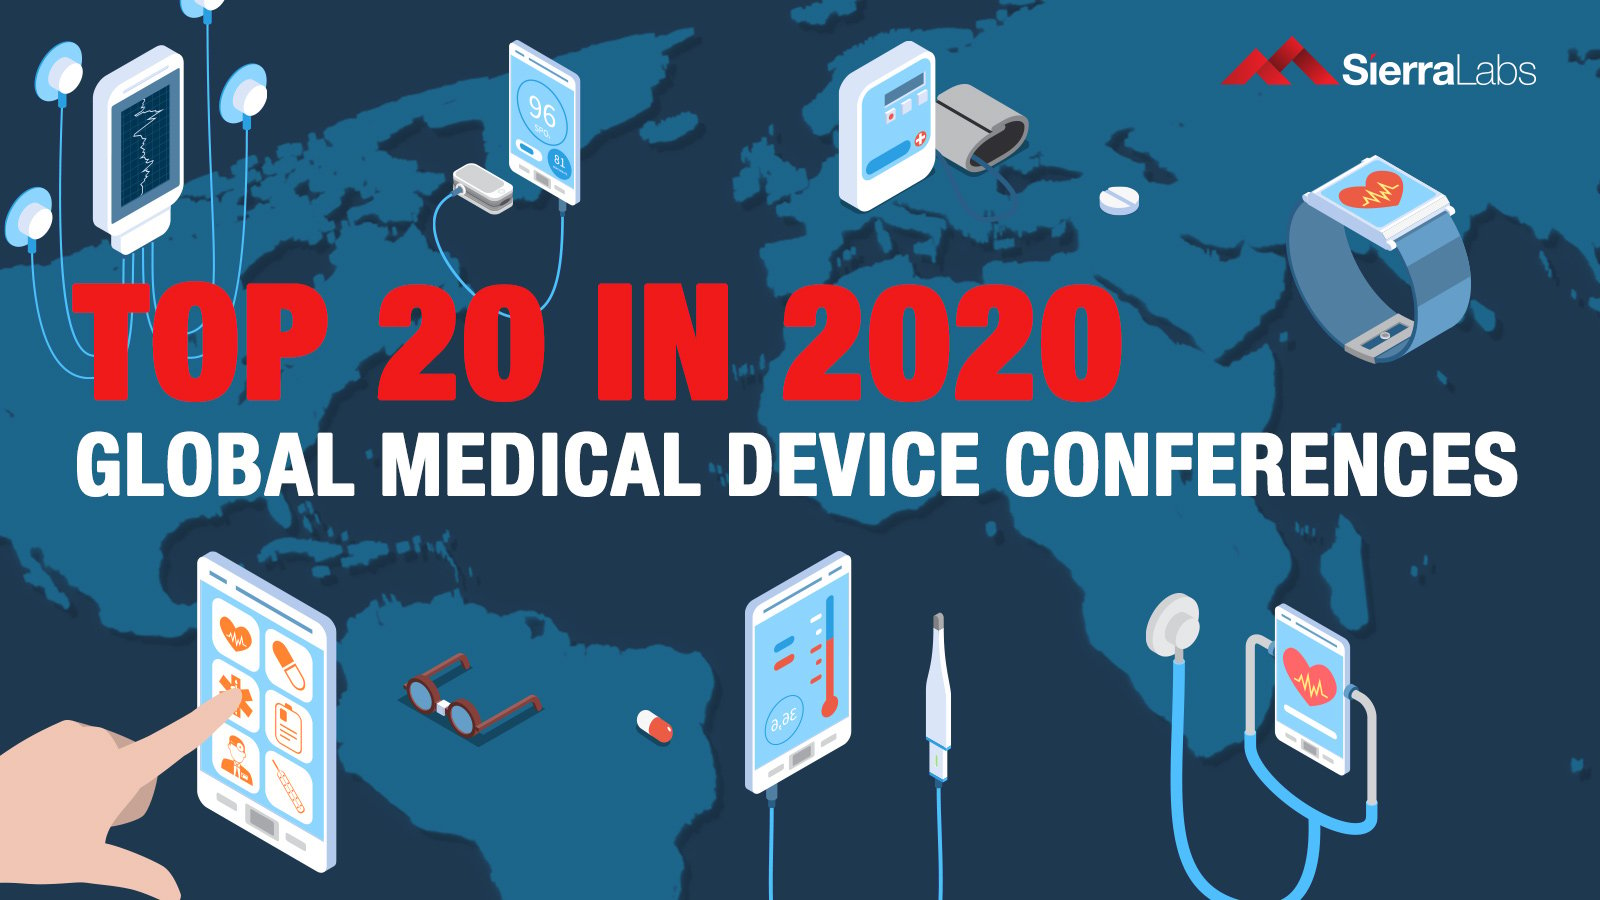 Top 20 Medical Device Conferences to Attend in 2020